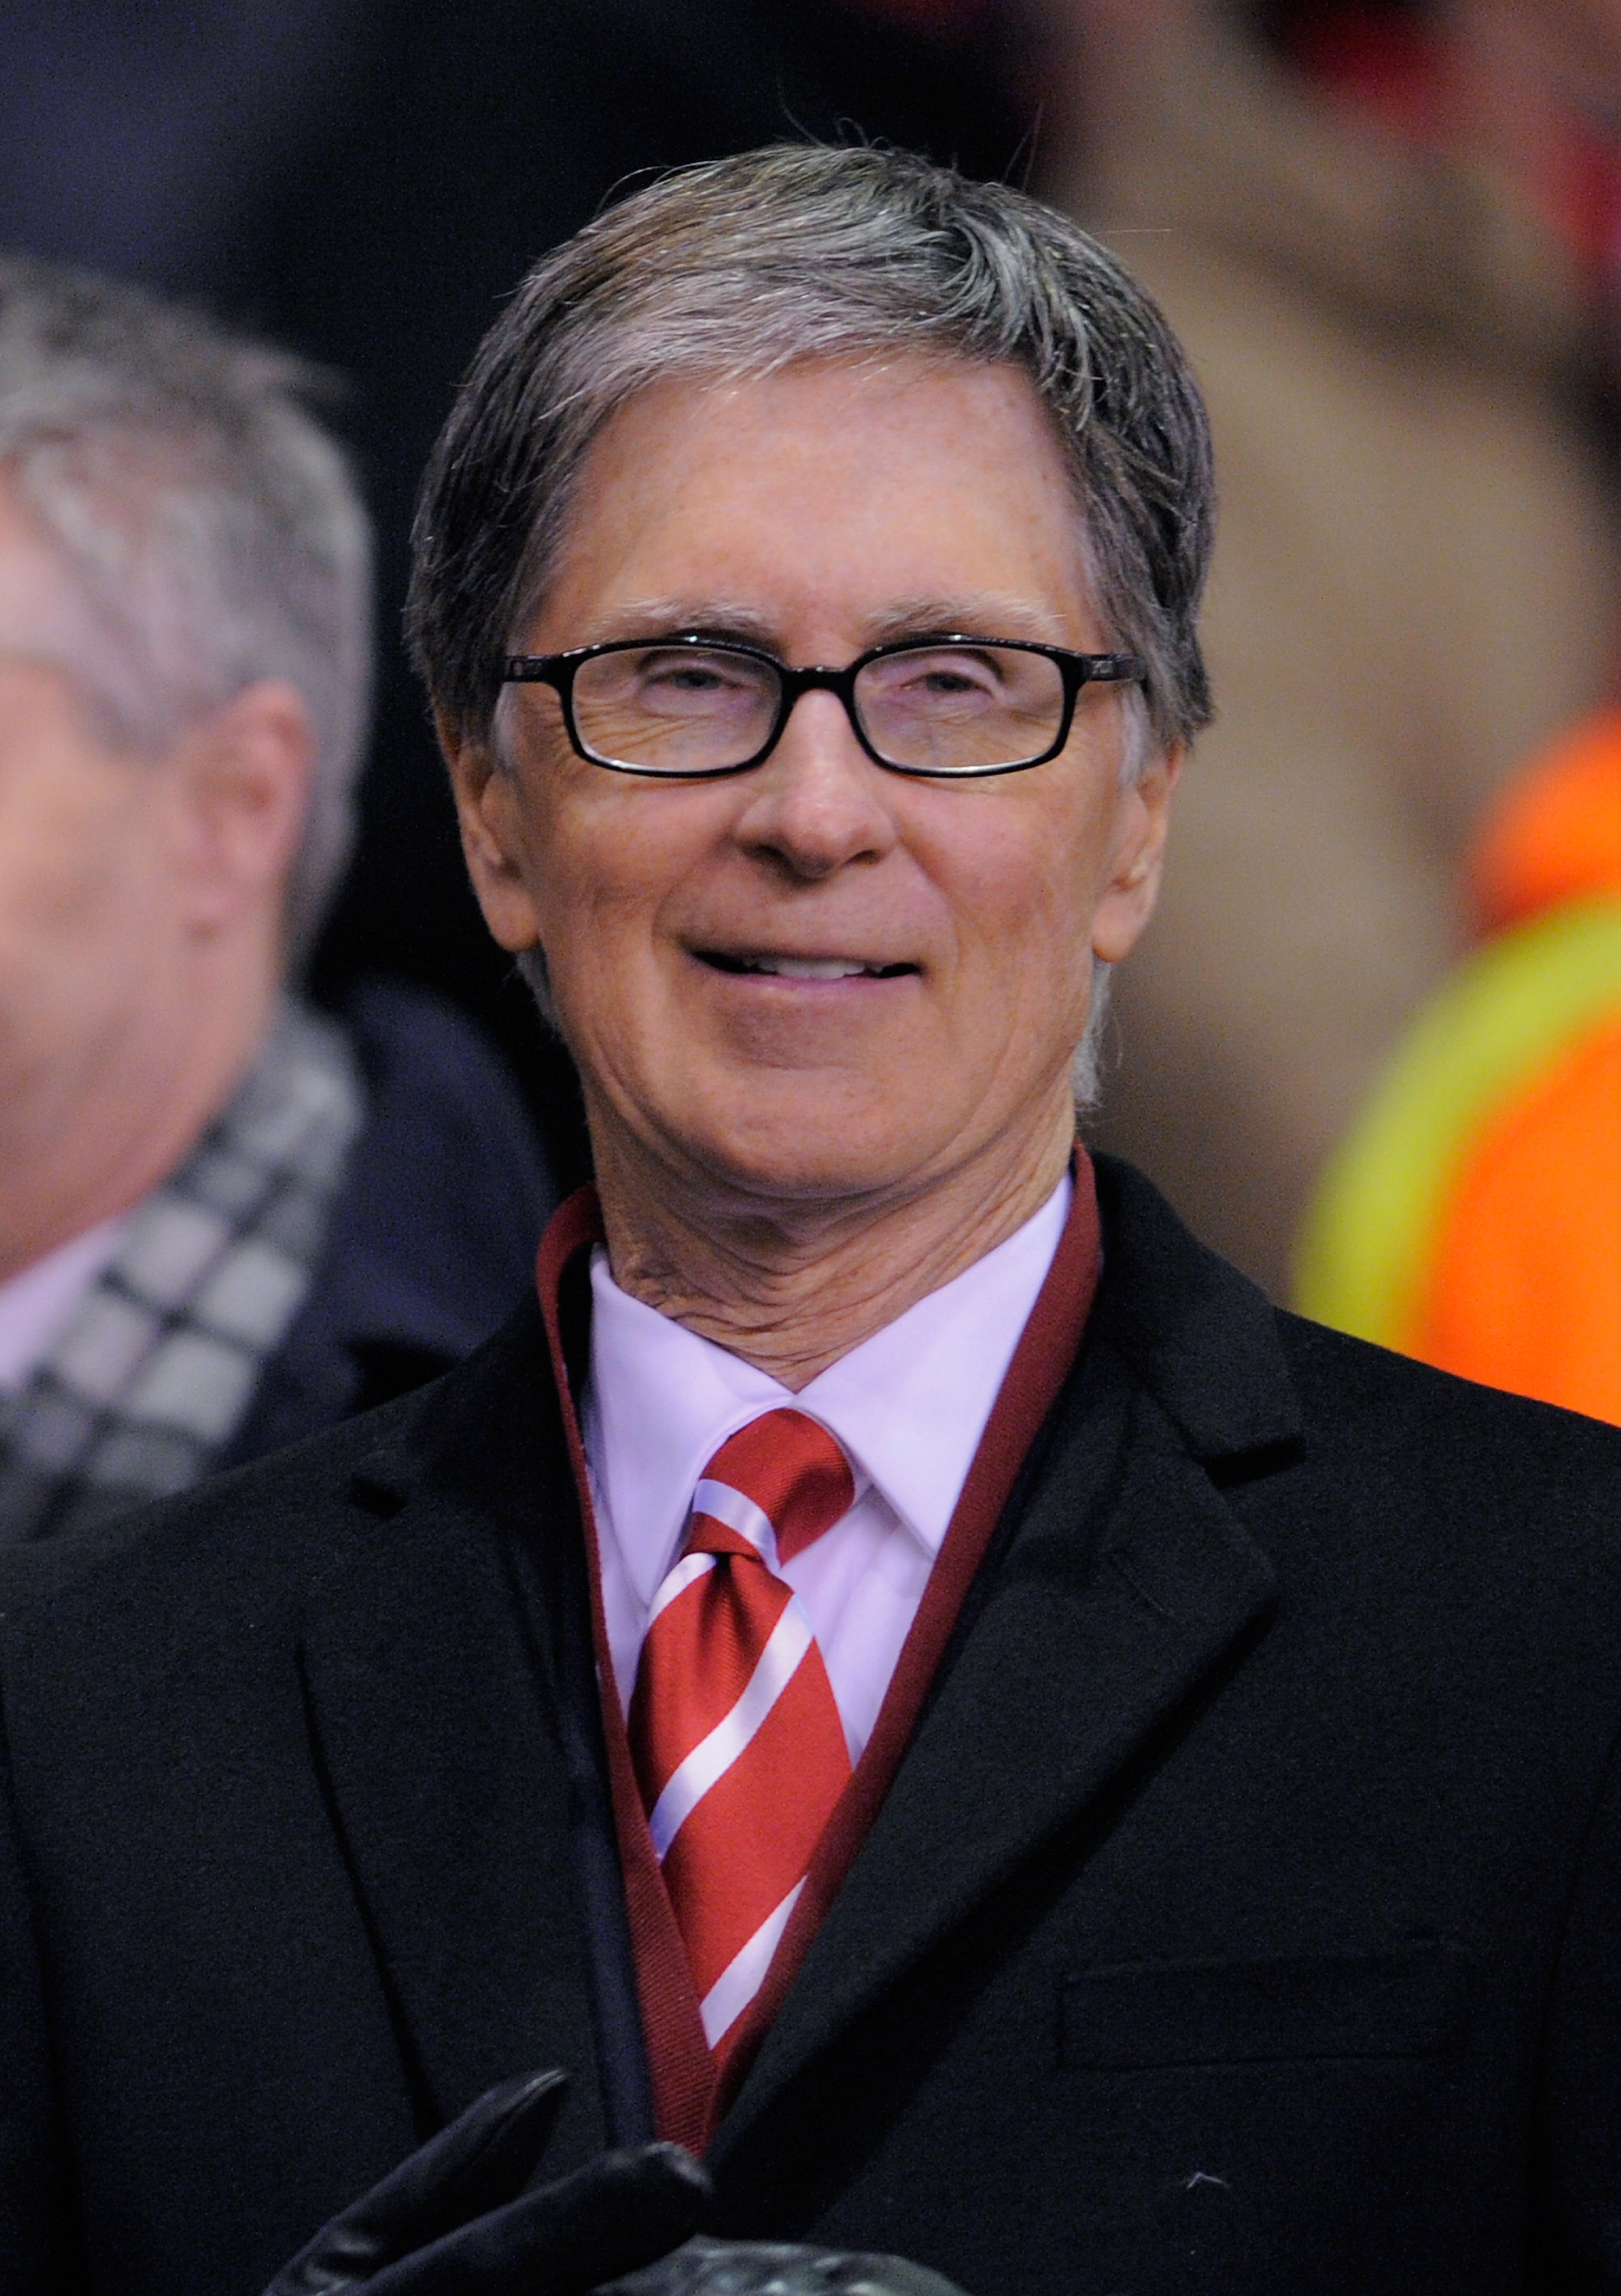 LIVERPOOL, ENGLAND - MARCH 17:  Liverpool owner John W Henry looks on ahead of the UEFA Europa League Round of 16 second leg match between Liverpool and SC Braga at Anfield on March 17, 2011 in Liverpool, England.  (Photo by Michael Regan/Getty Images)